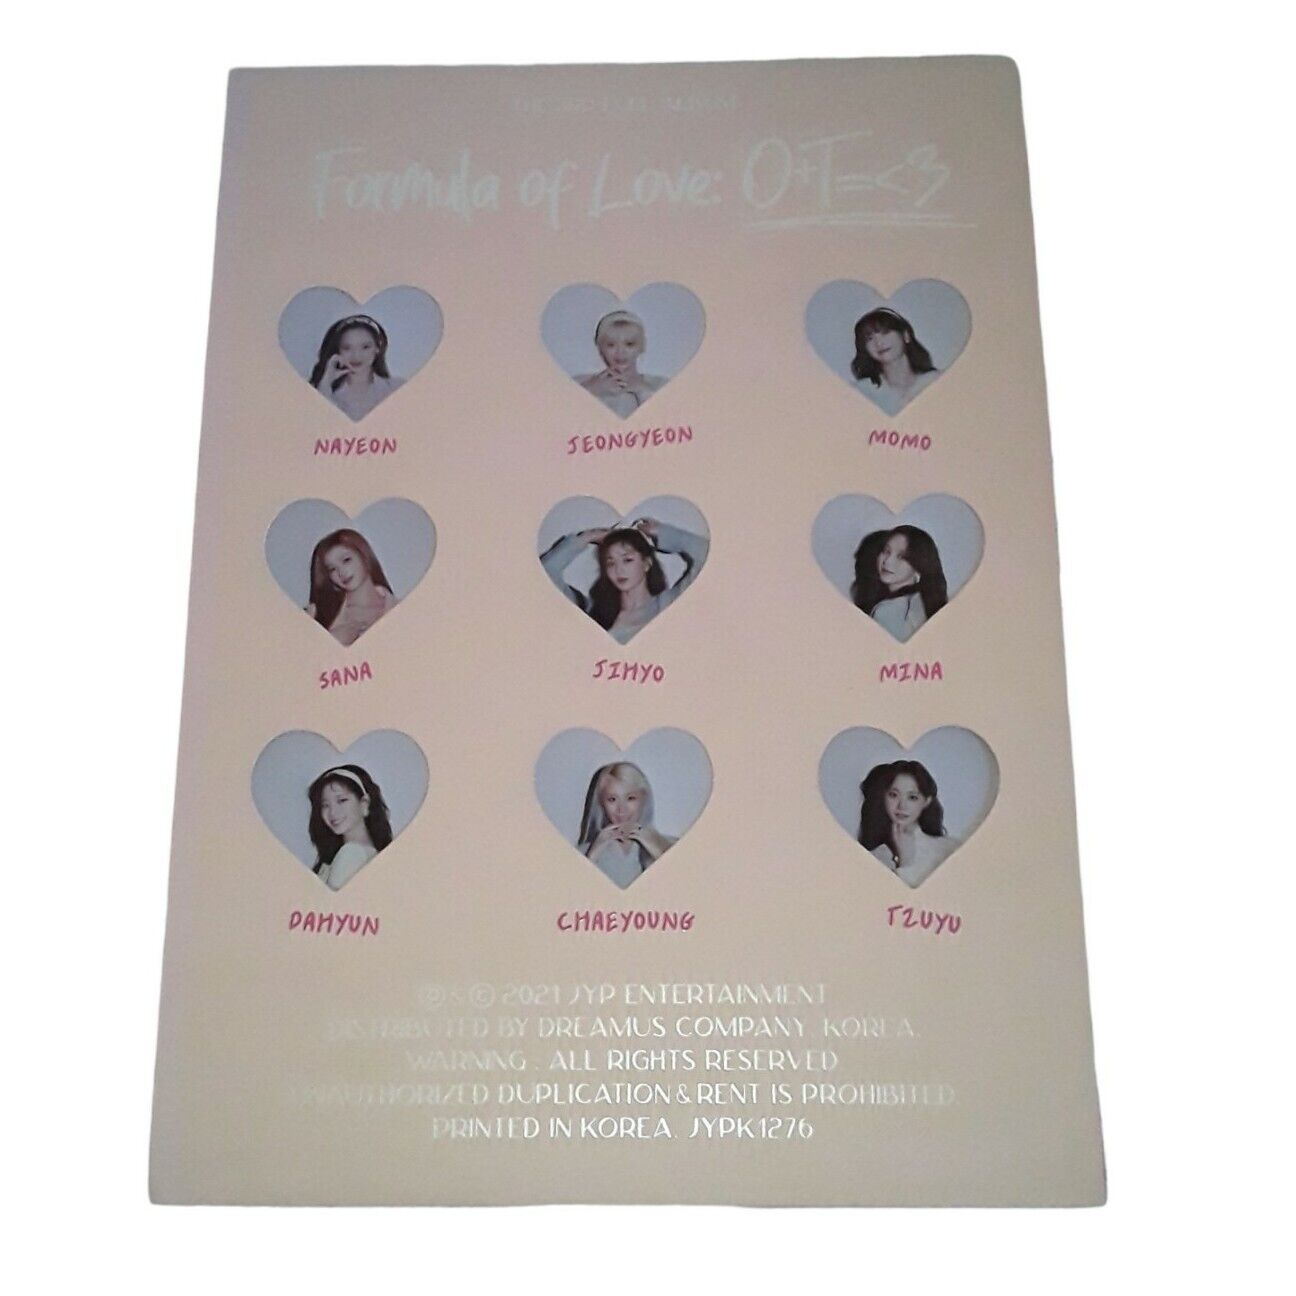 TWICE - Formula of Love: O+T= 3 US Target Exclusive CD Kpop Goodies Cards Poster